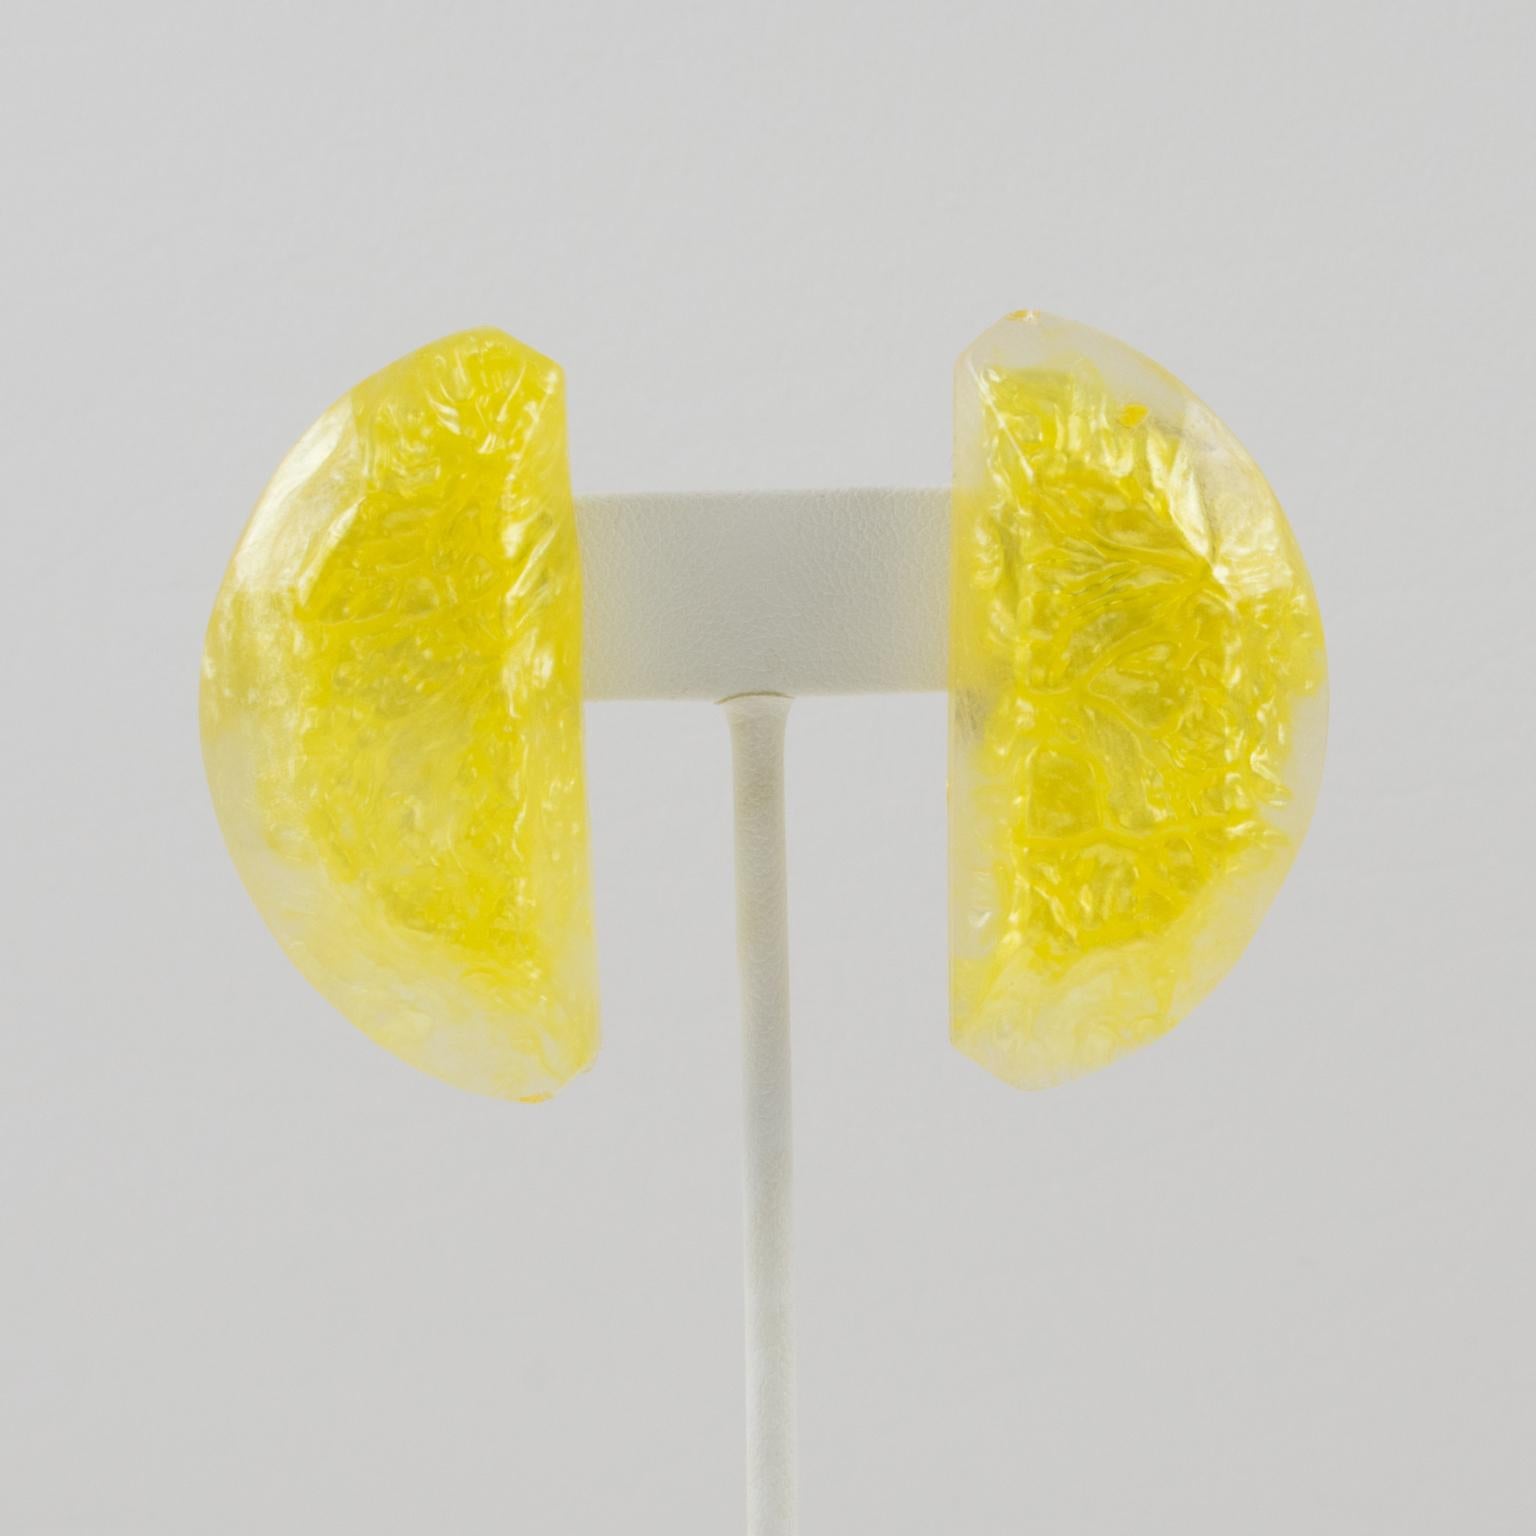 Kaso Lucite Clip Earrings Yellow Lemon Slice In Excellent Condition For Sale In Atlanta, GA